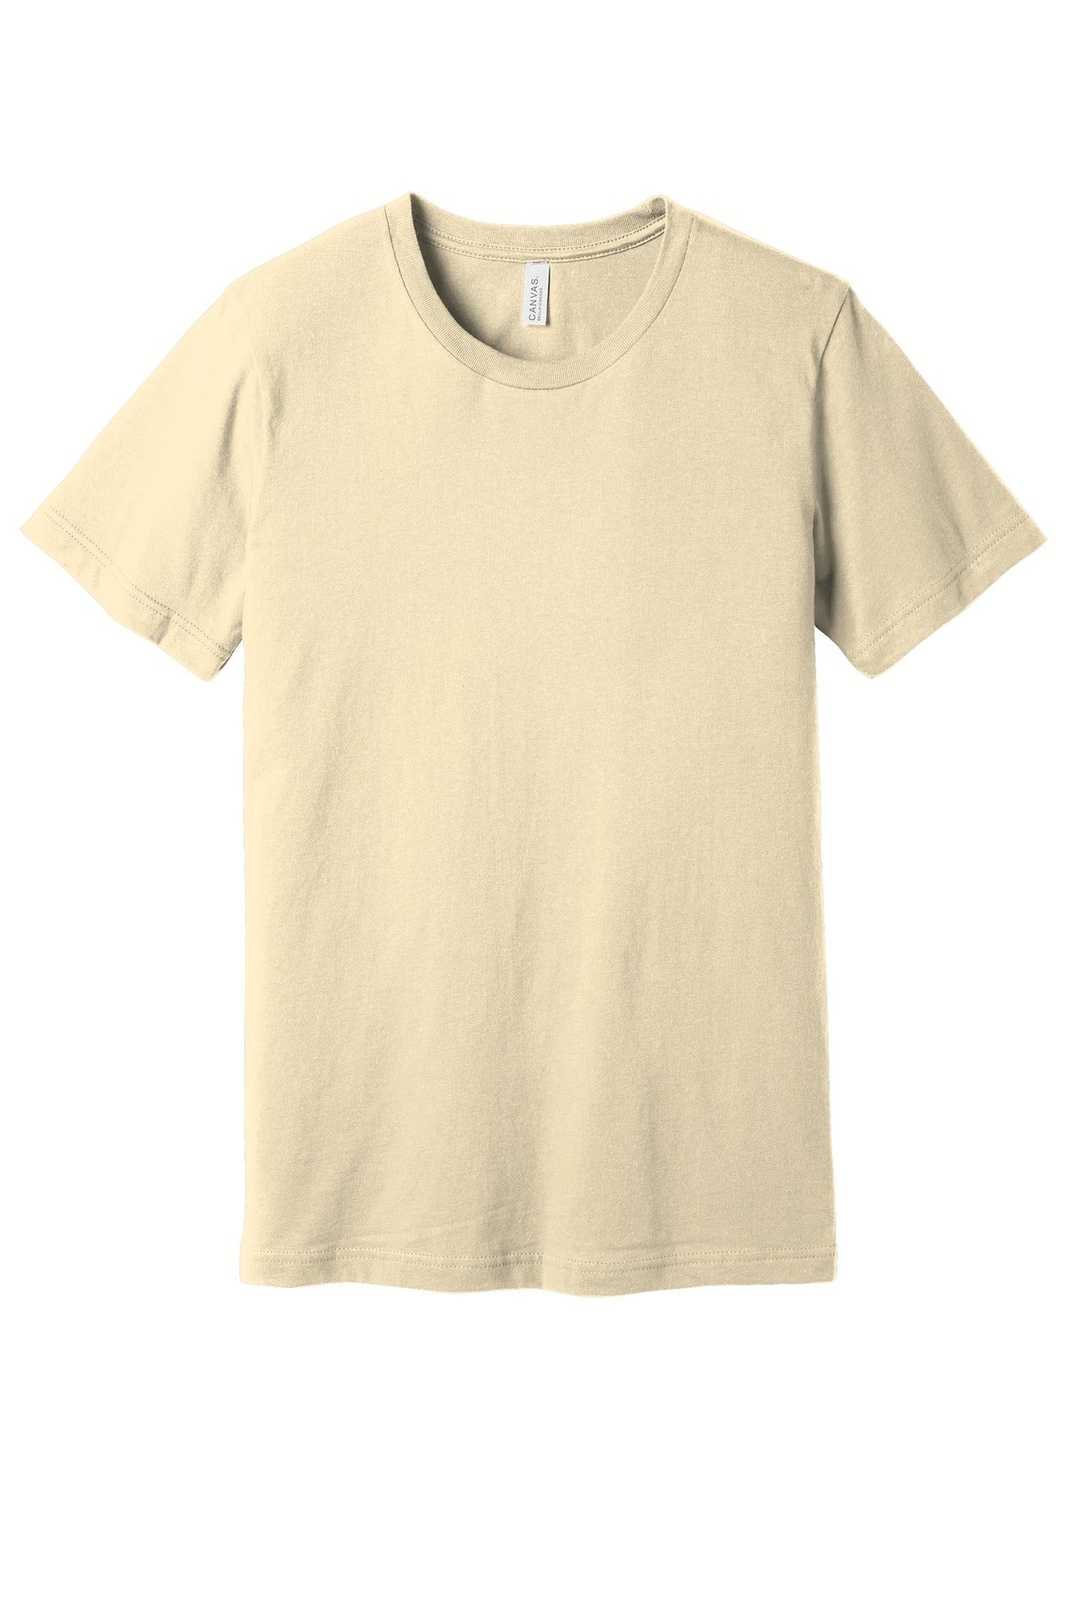 Bella + Canvas 3001 Unisex Jersey Short Sleeve Tee - Natural - HIT a Double